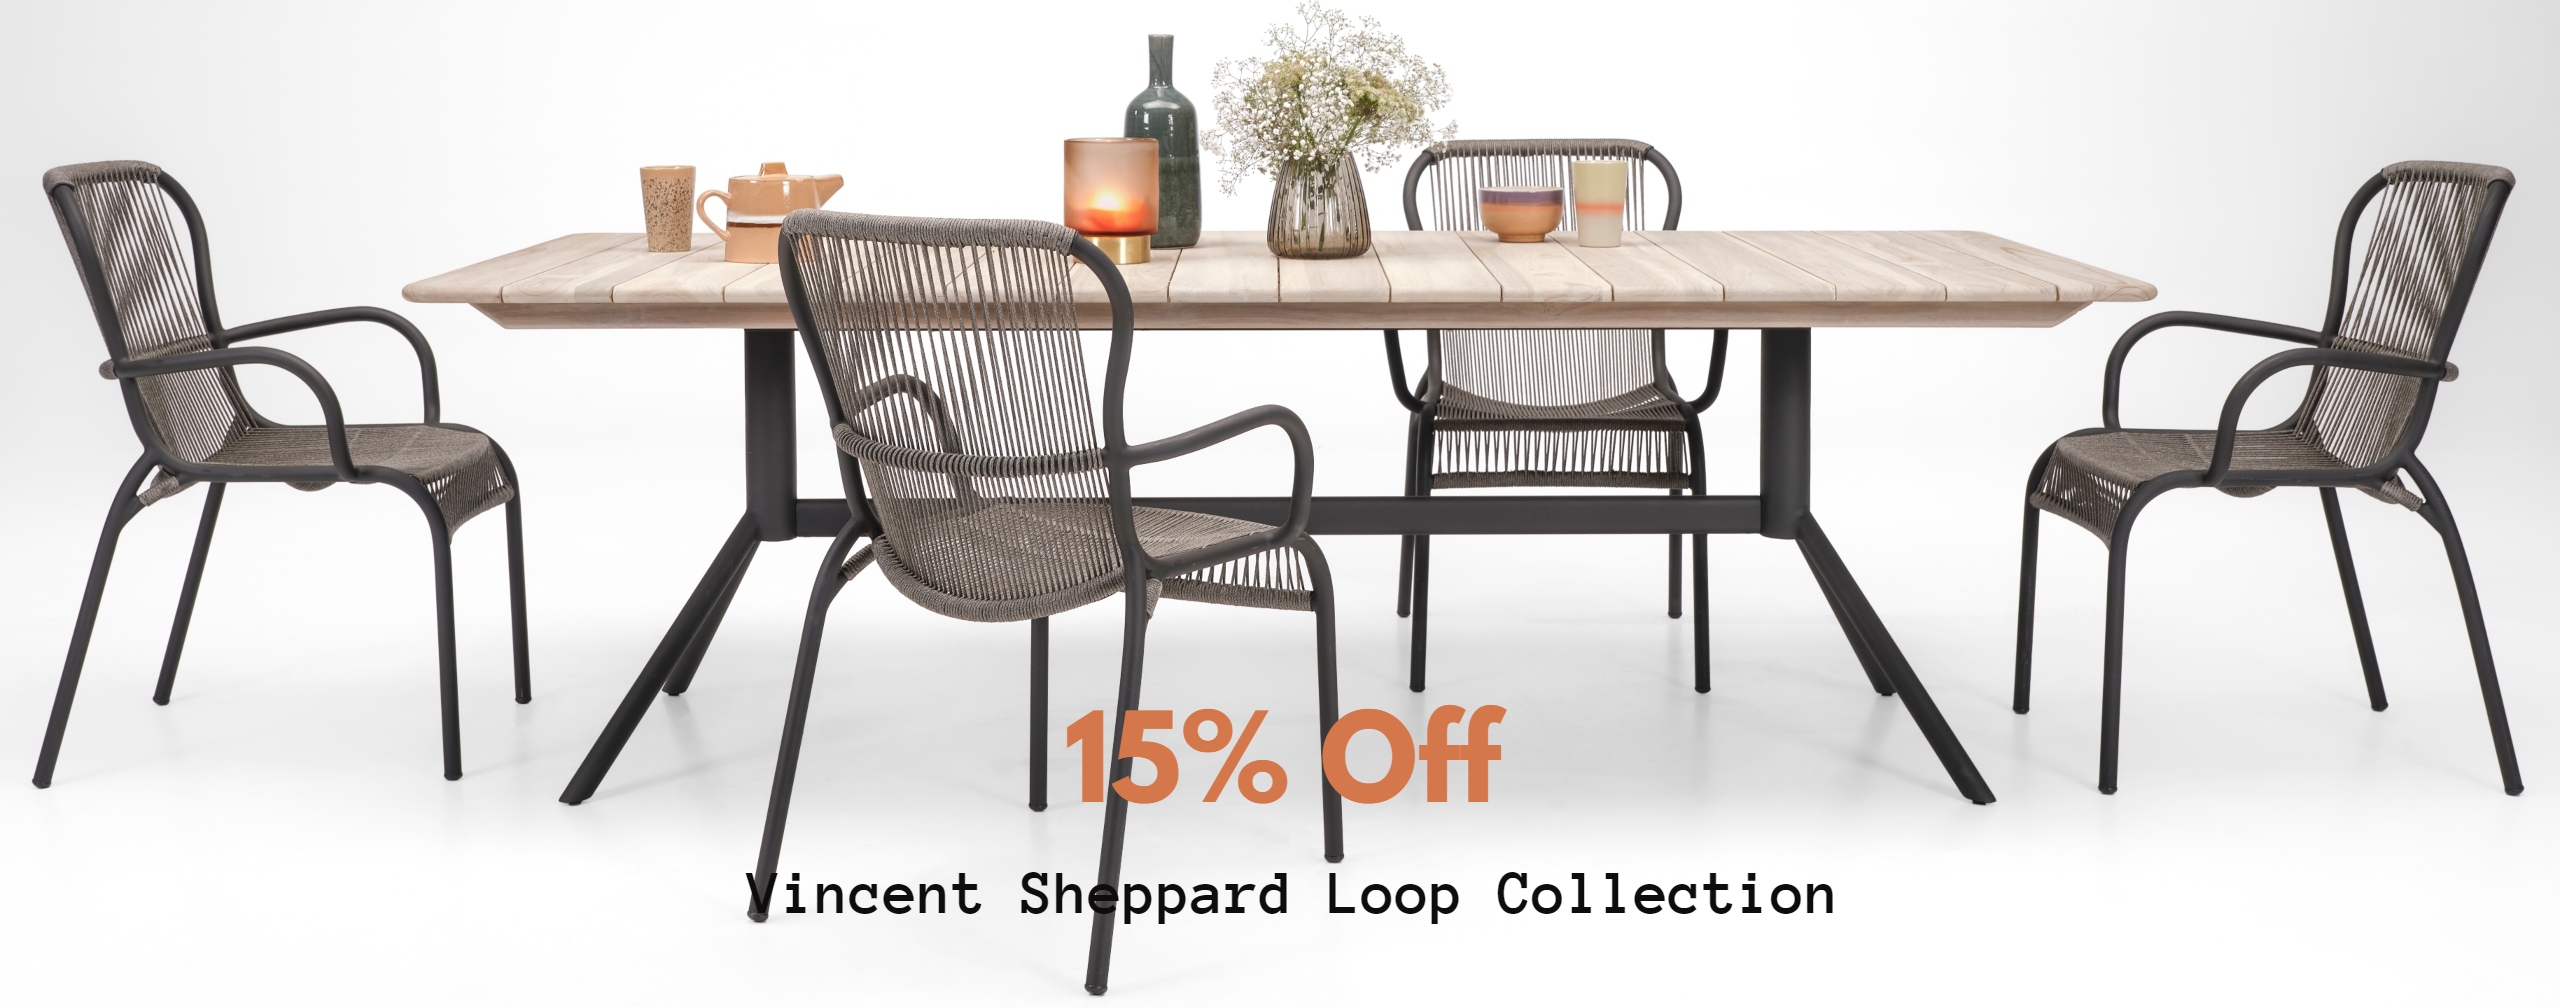 vincent-sheppard-loop-dining-chair-fossil-grey-dining-table-4-1-3-